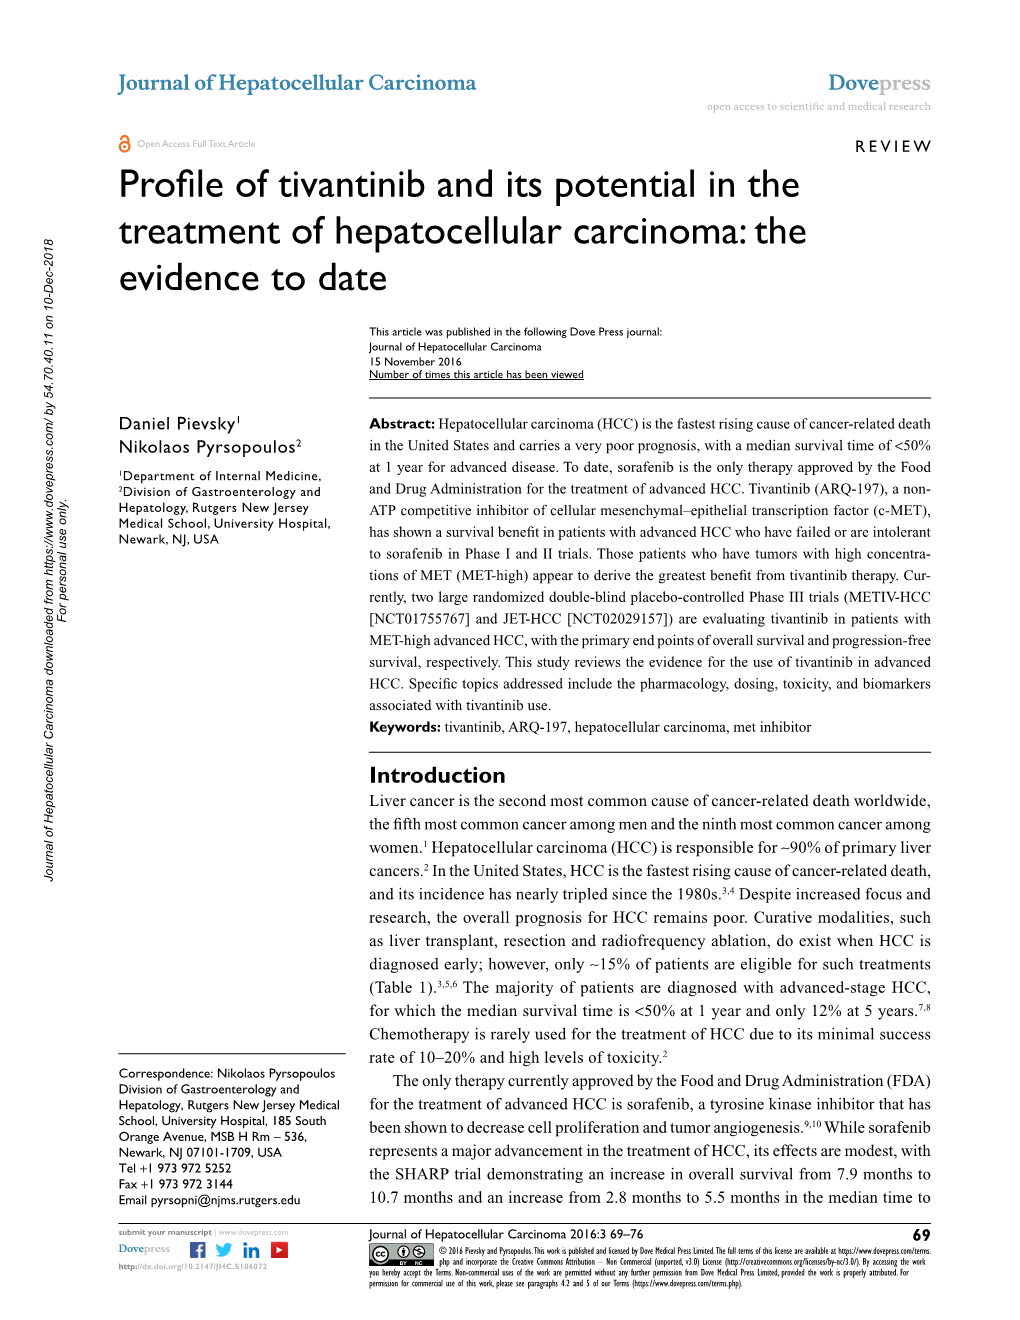 Profile of Tivantinib and Its Potential in the Treatment of Hepatocellular Carcinoma: the Evidence to Date